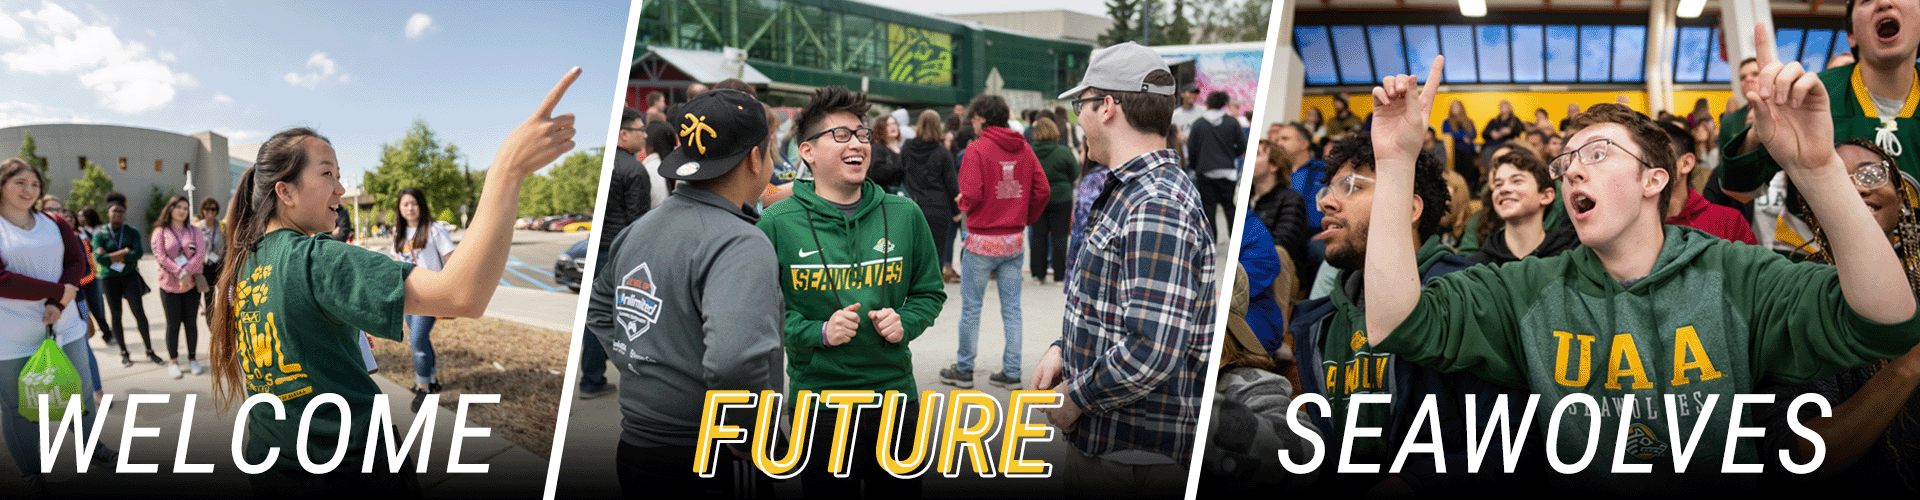 Welcome Future Seawolves